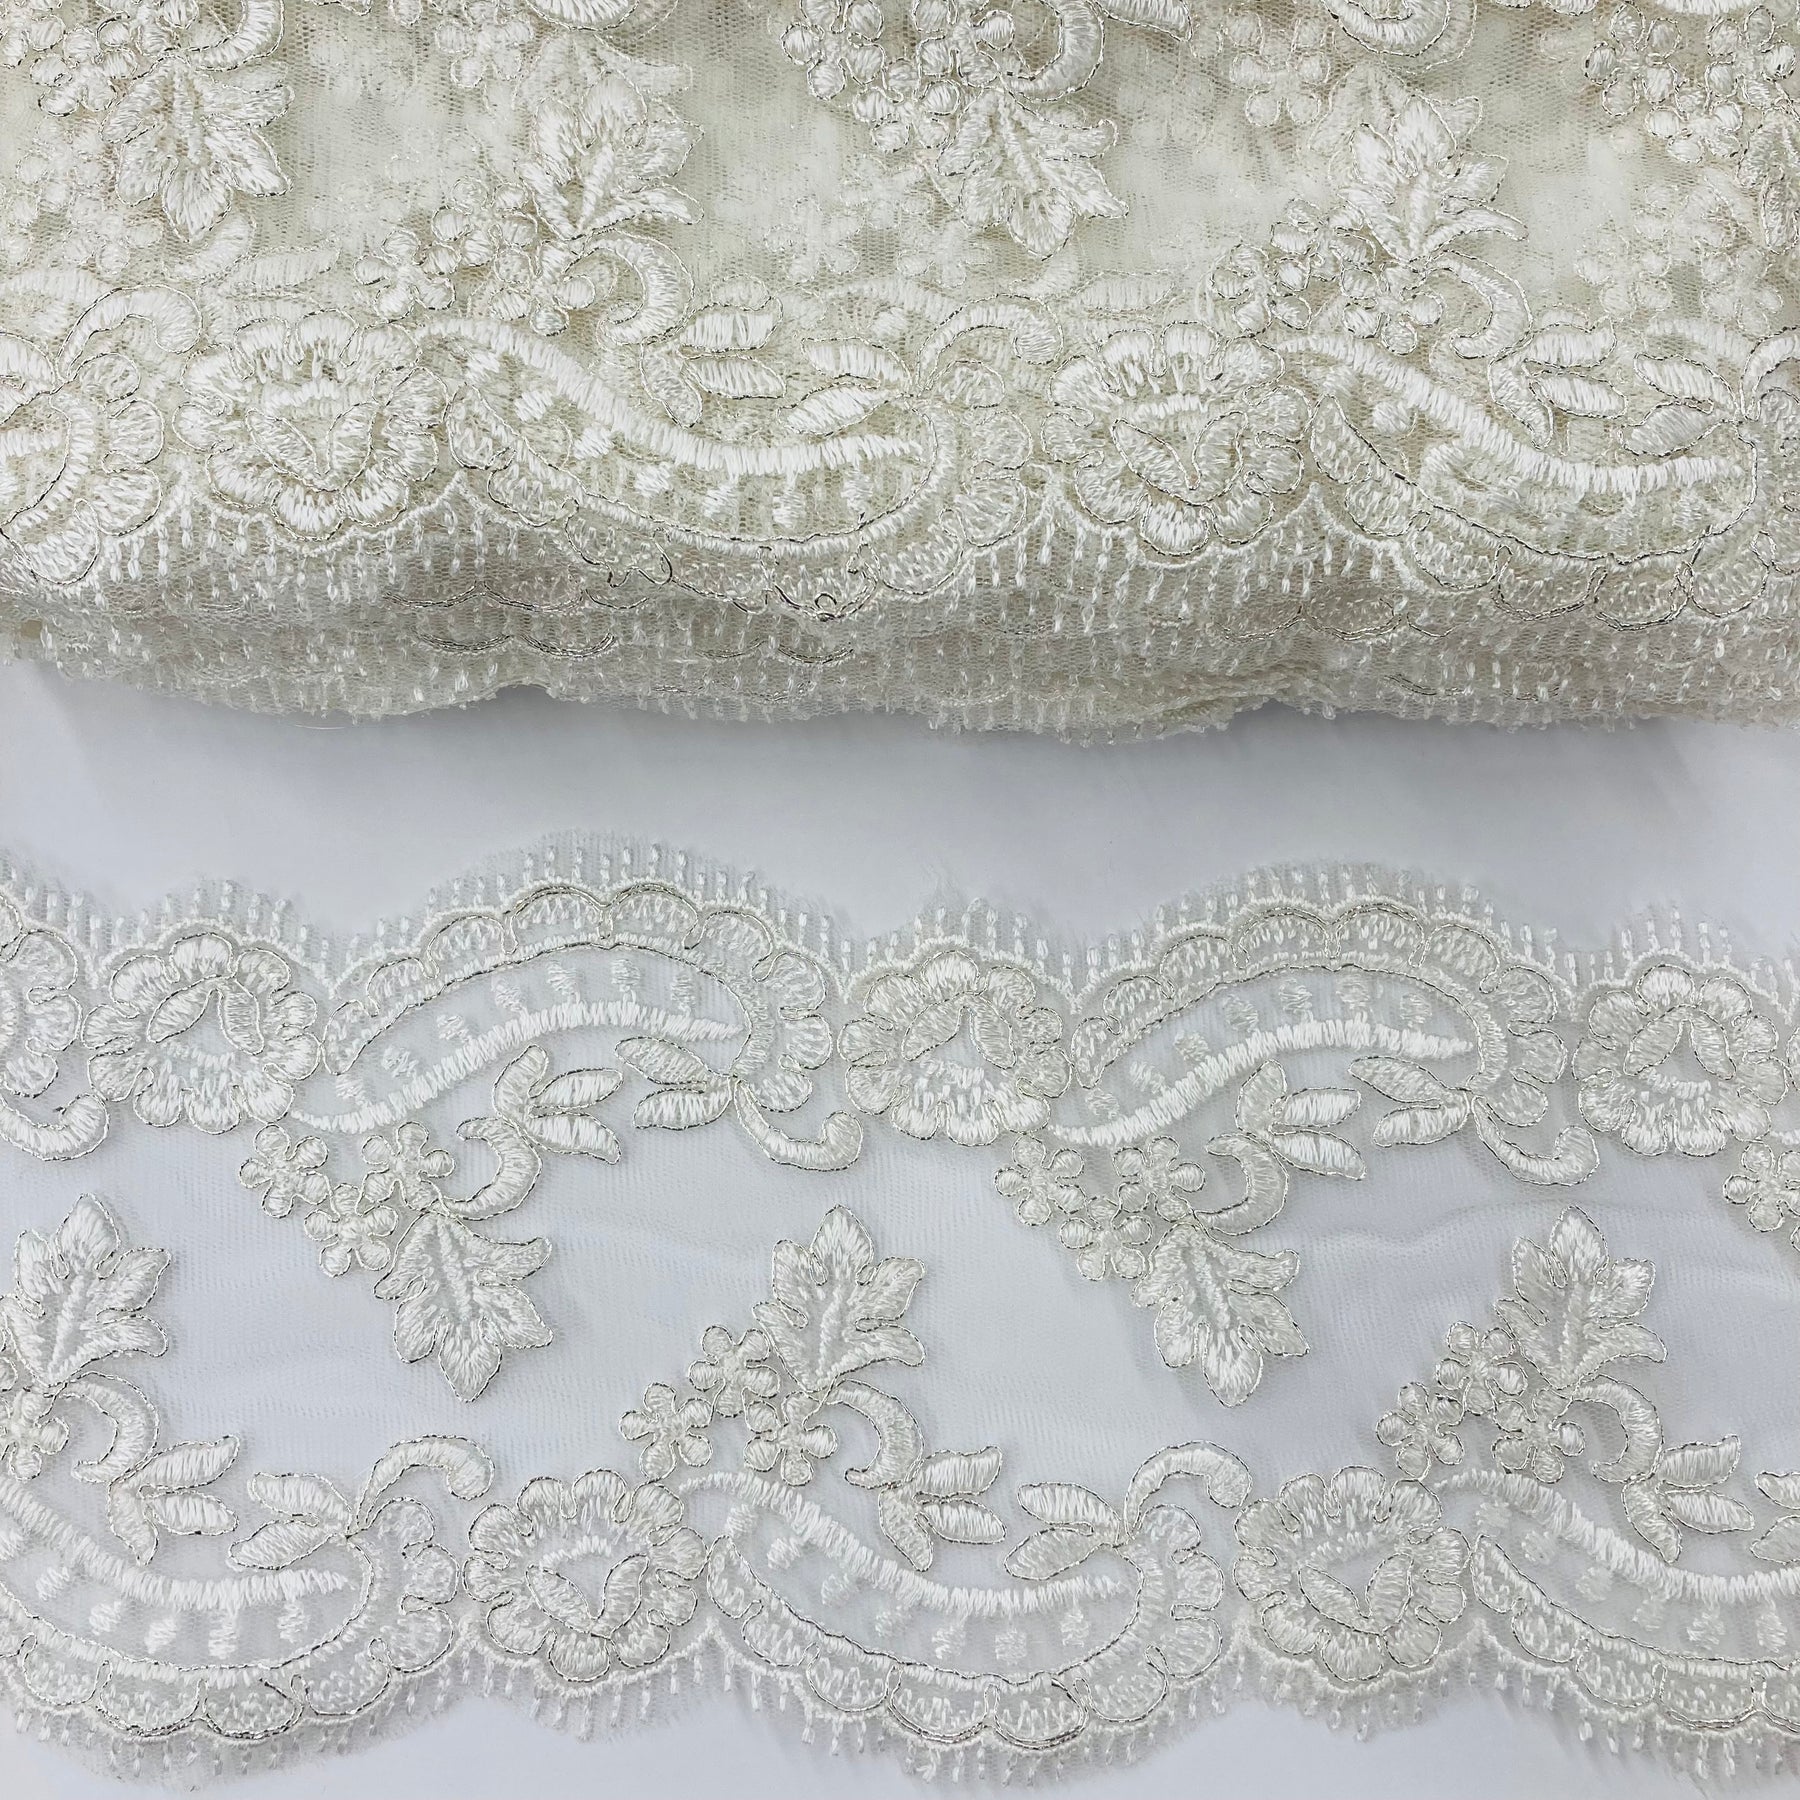 Corded Double Sided Lace Trimming Embroidered on 100% Polyester Net Me ...